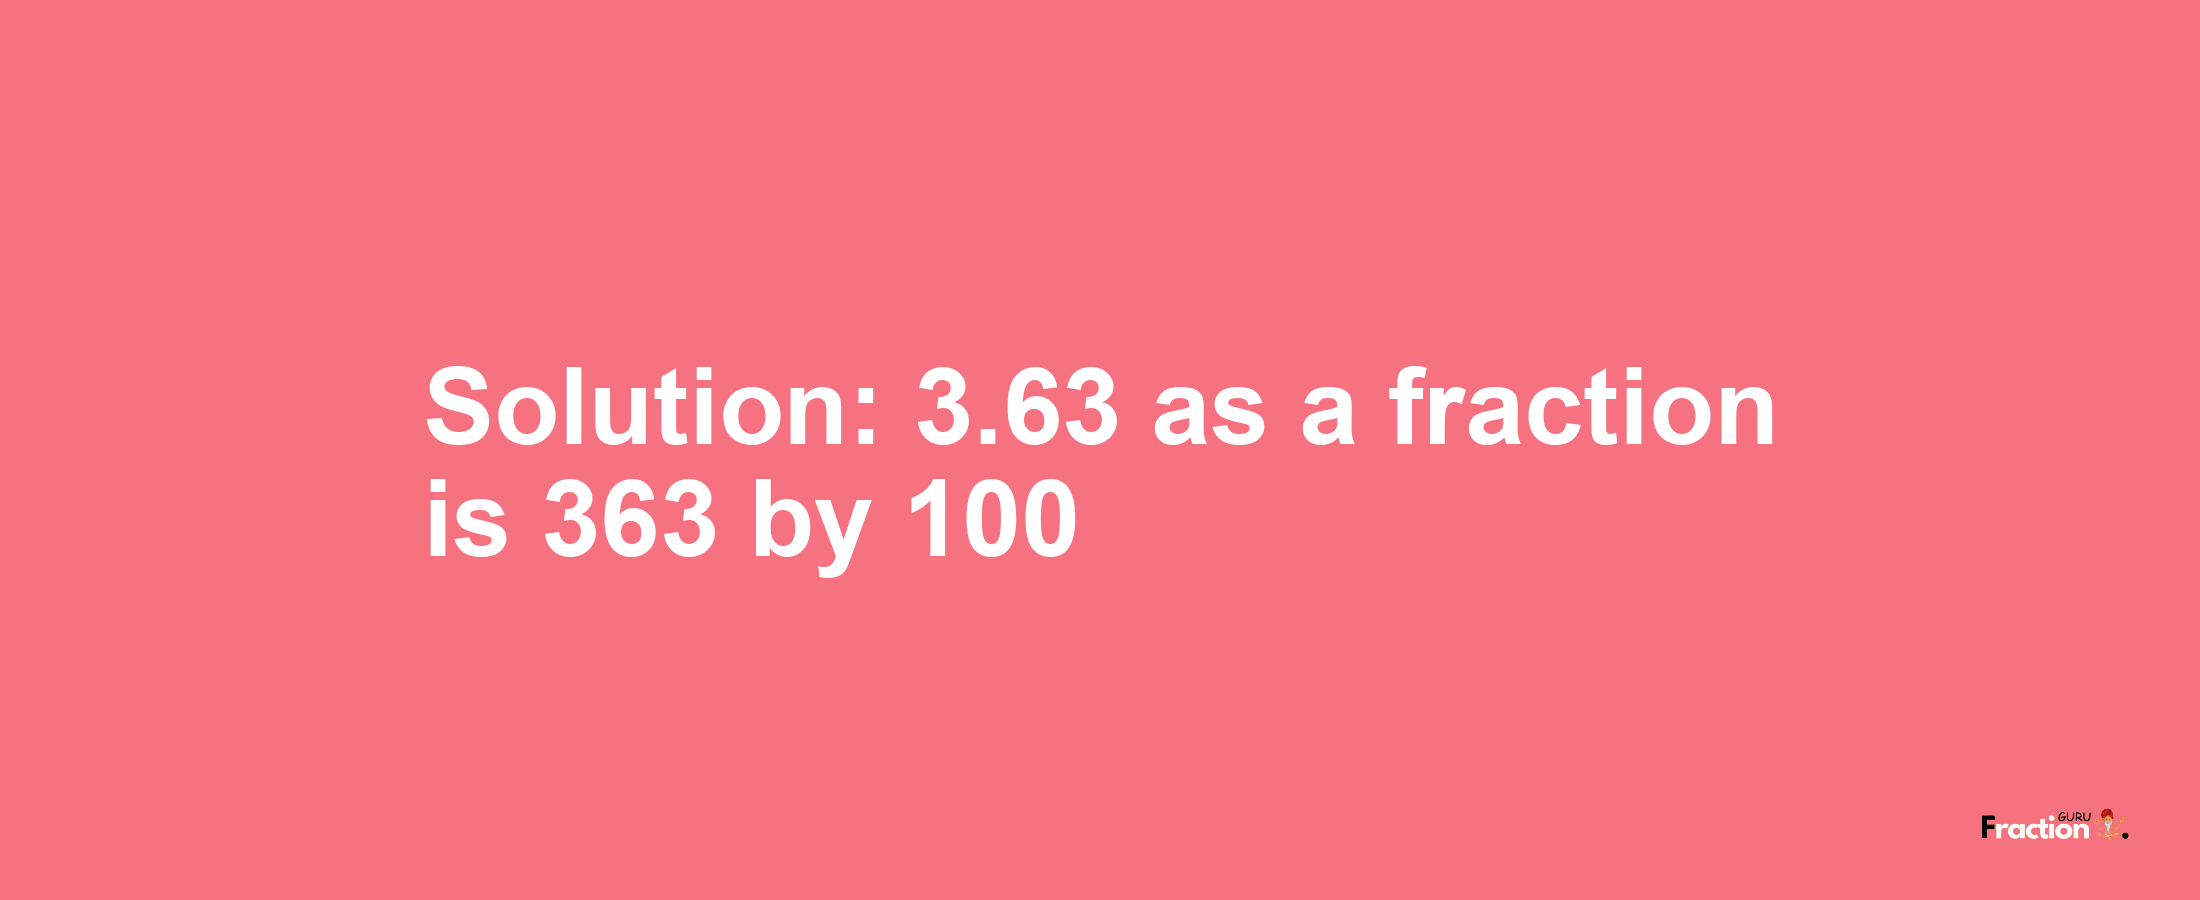 Solution:3.63 as a fraction is 363/100